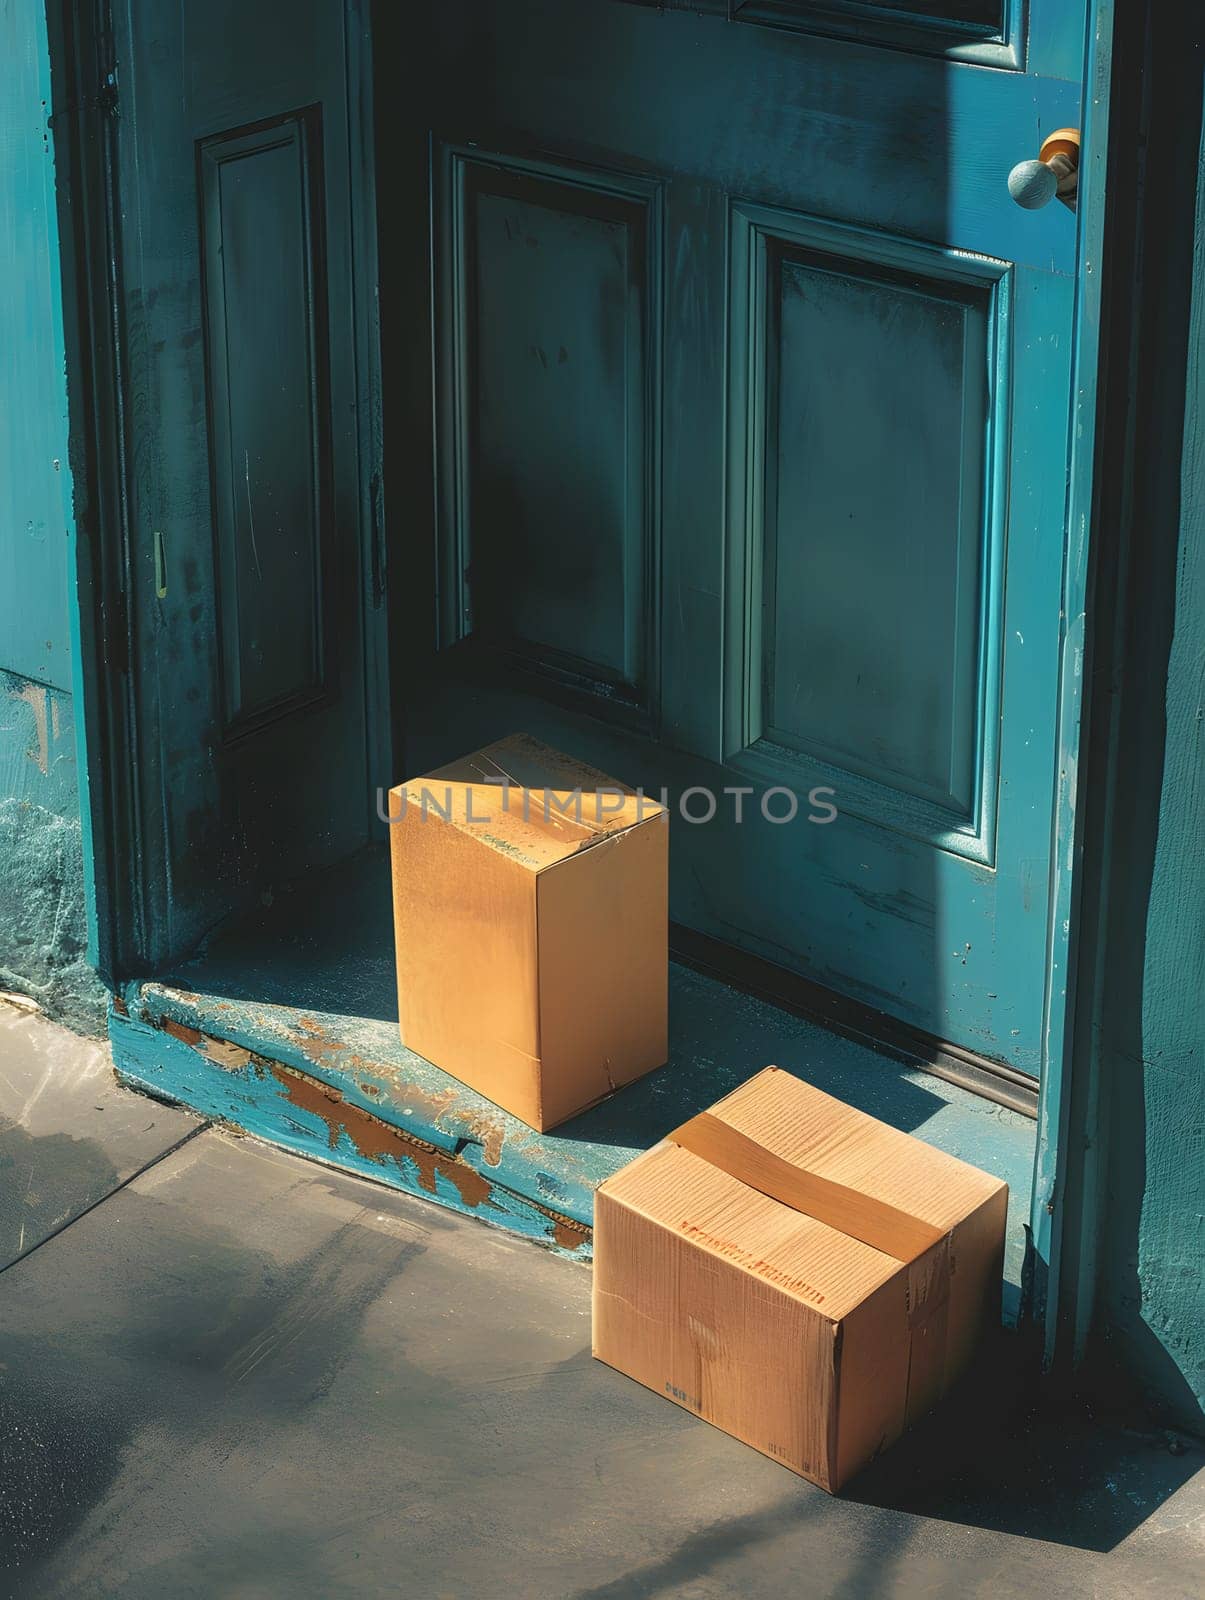 Two cardboard boxes by a blue door in a woodfloored room by Nadtochiy